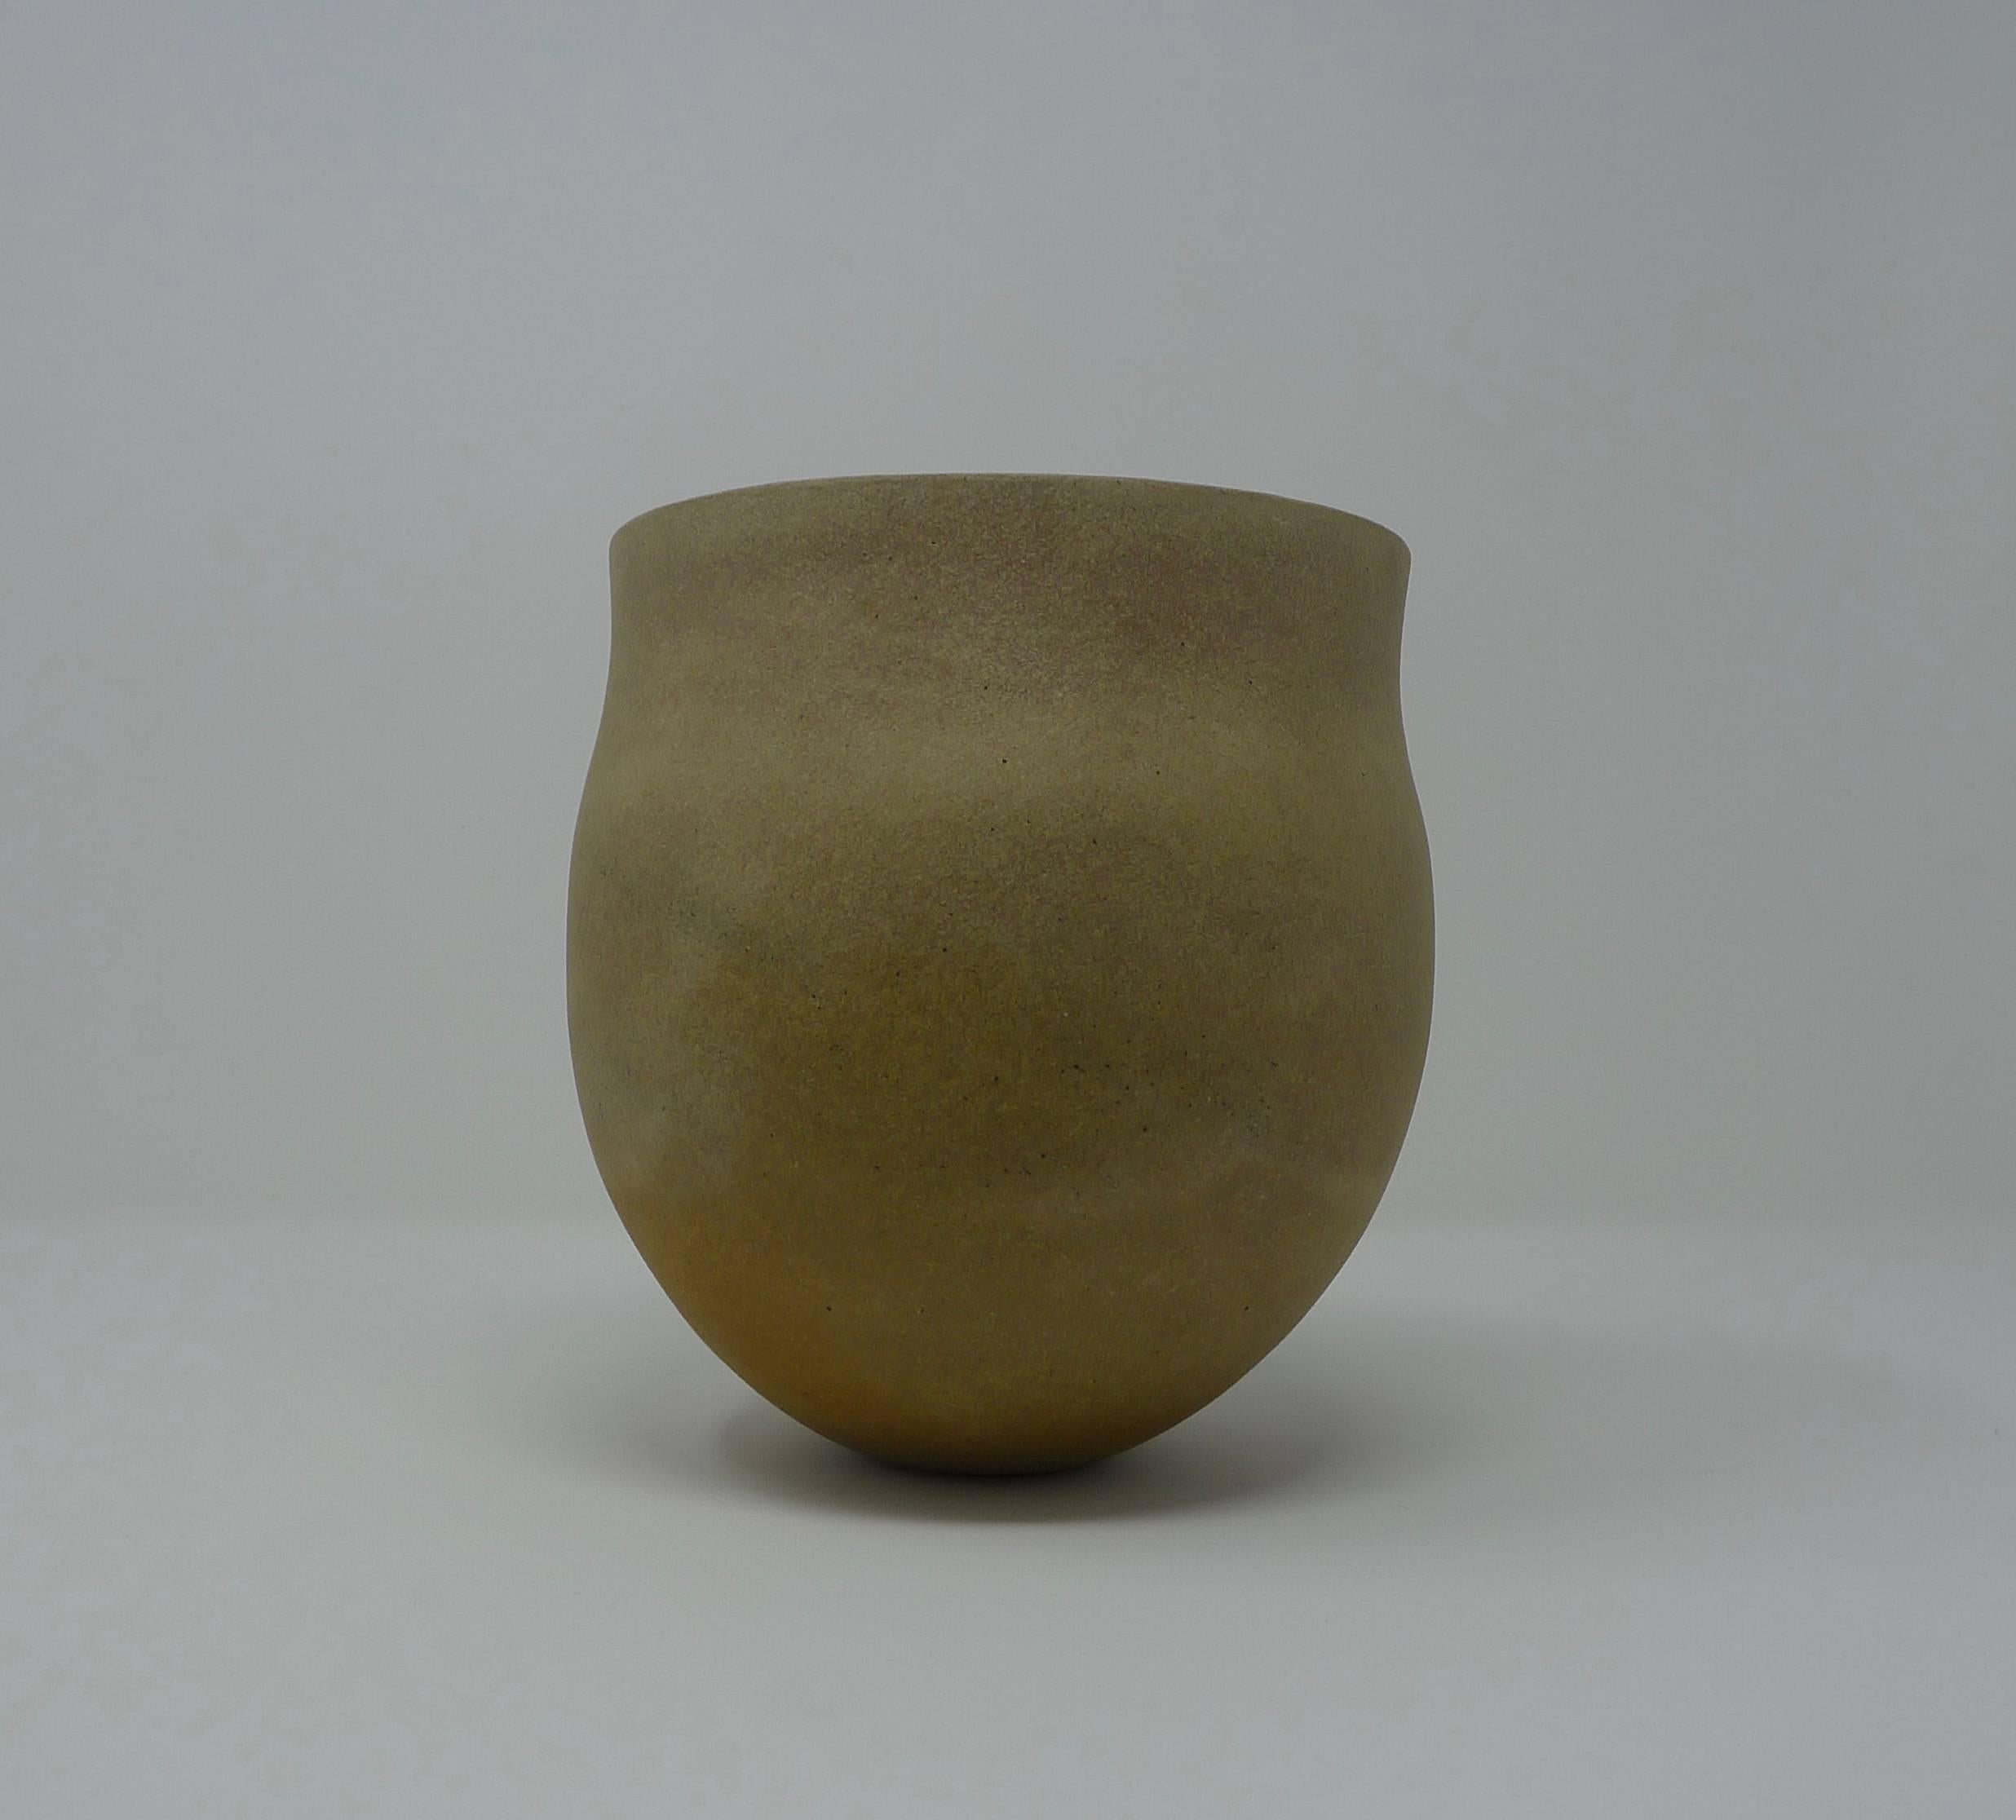 Jennifer Lee, British, b 1956. Stoneware pot, circa 1987, integral colors of mottled pale browns and yellows, with darker streaks and soft black speckle.

Perfect condition with no damage or restoration.